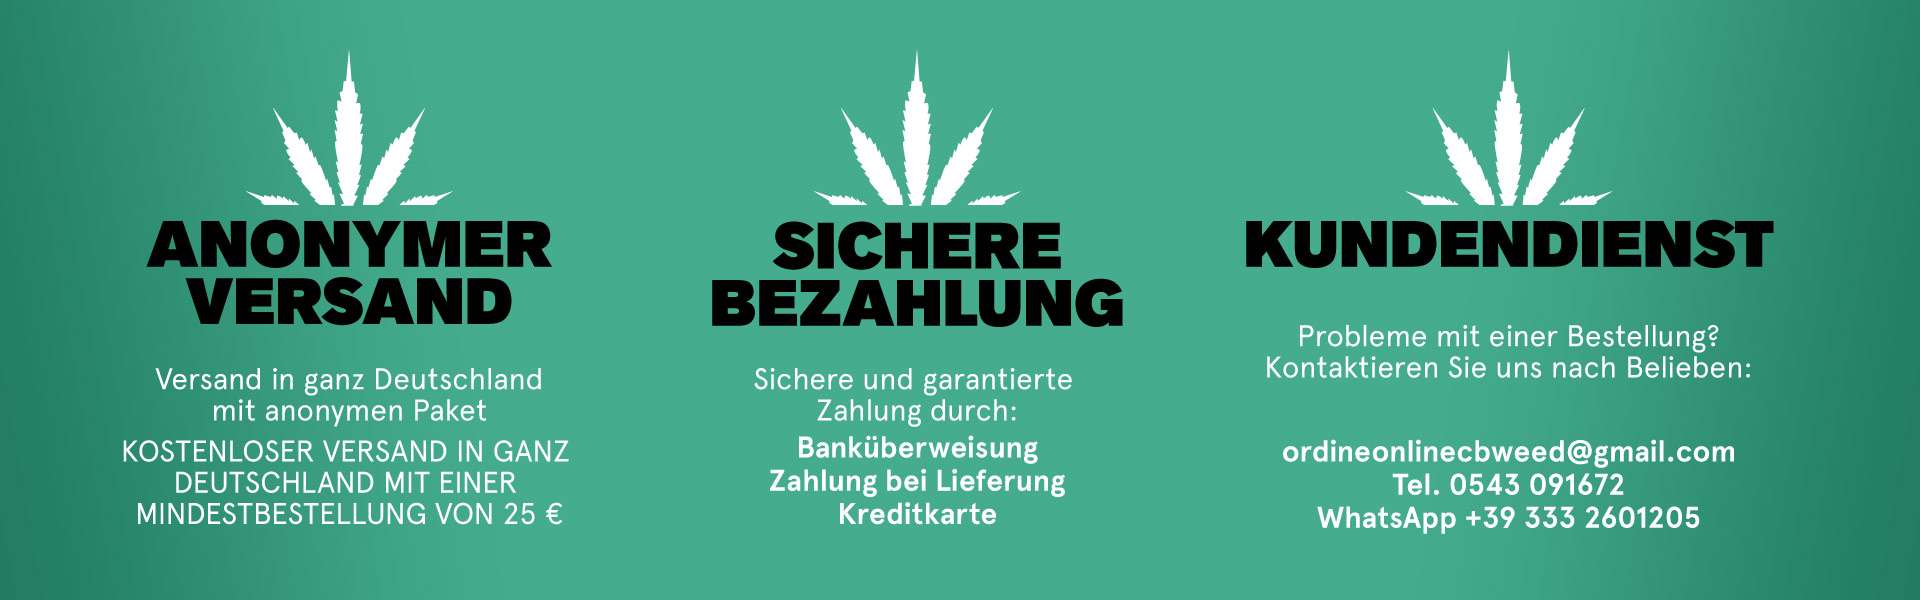 cbweed-banner